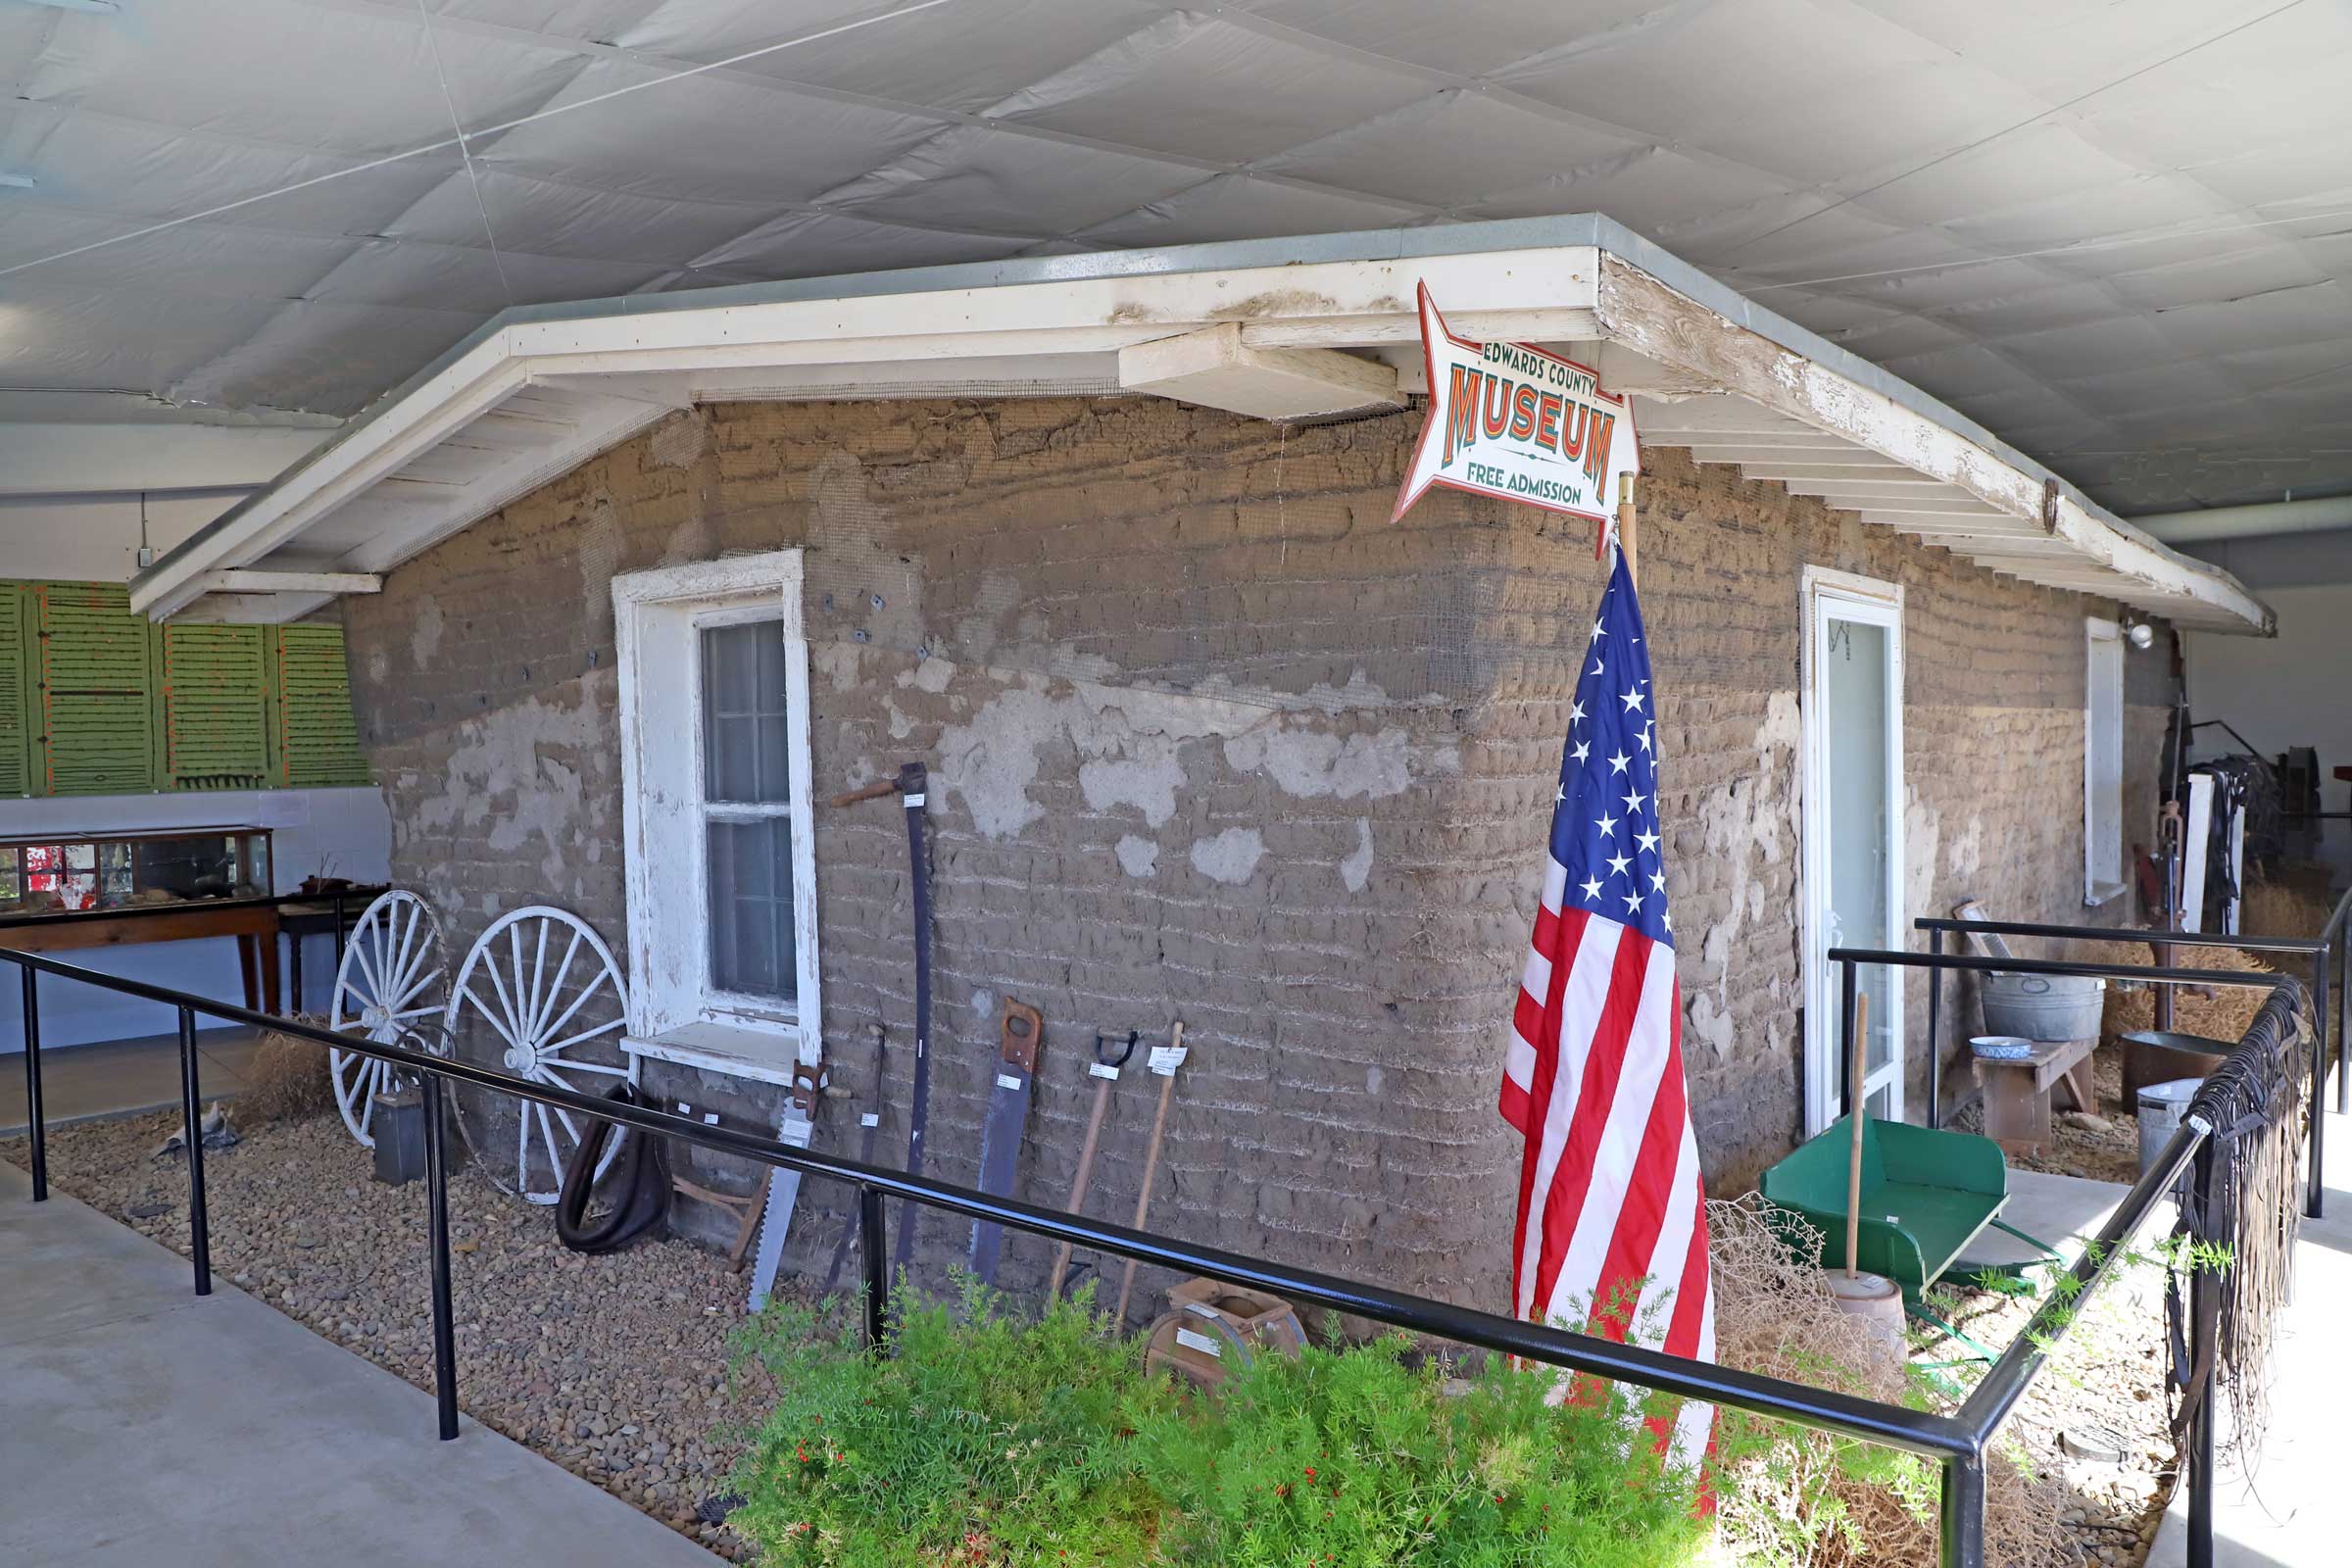 sod house museum with an American flag in the front corner